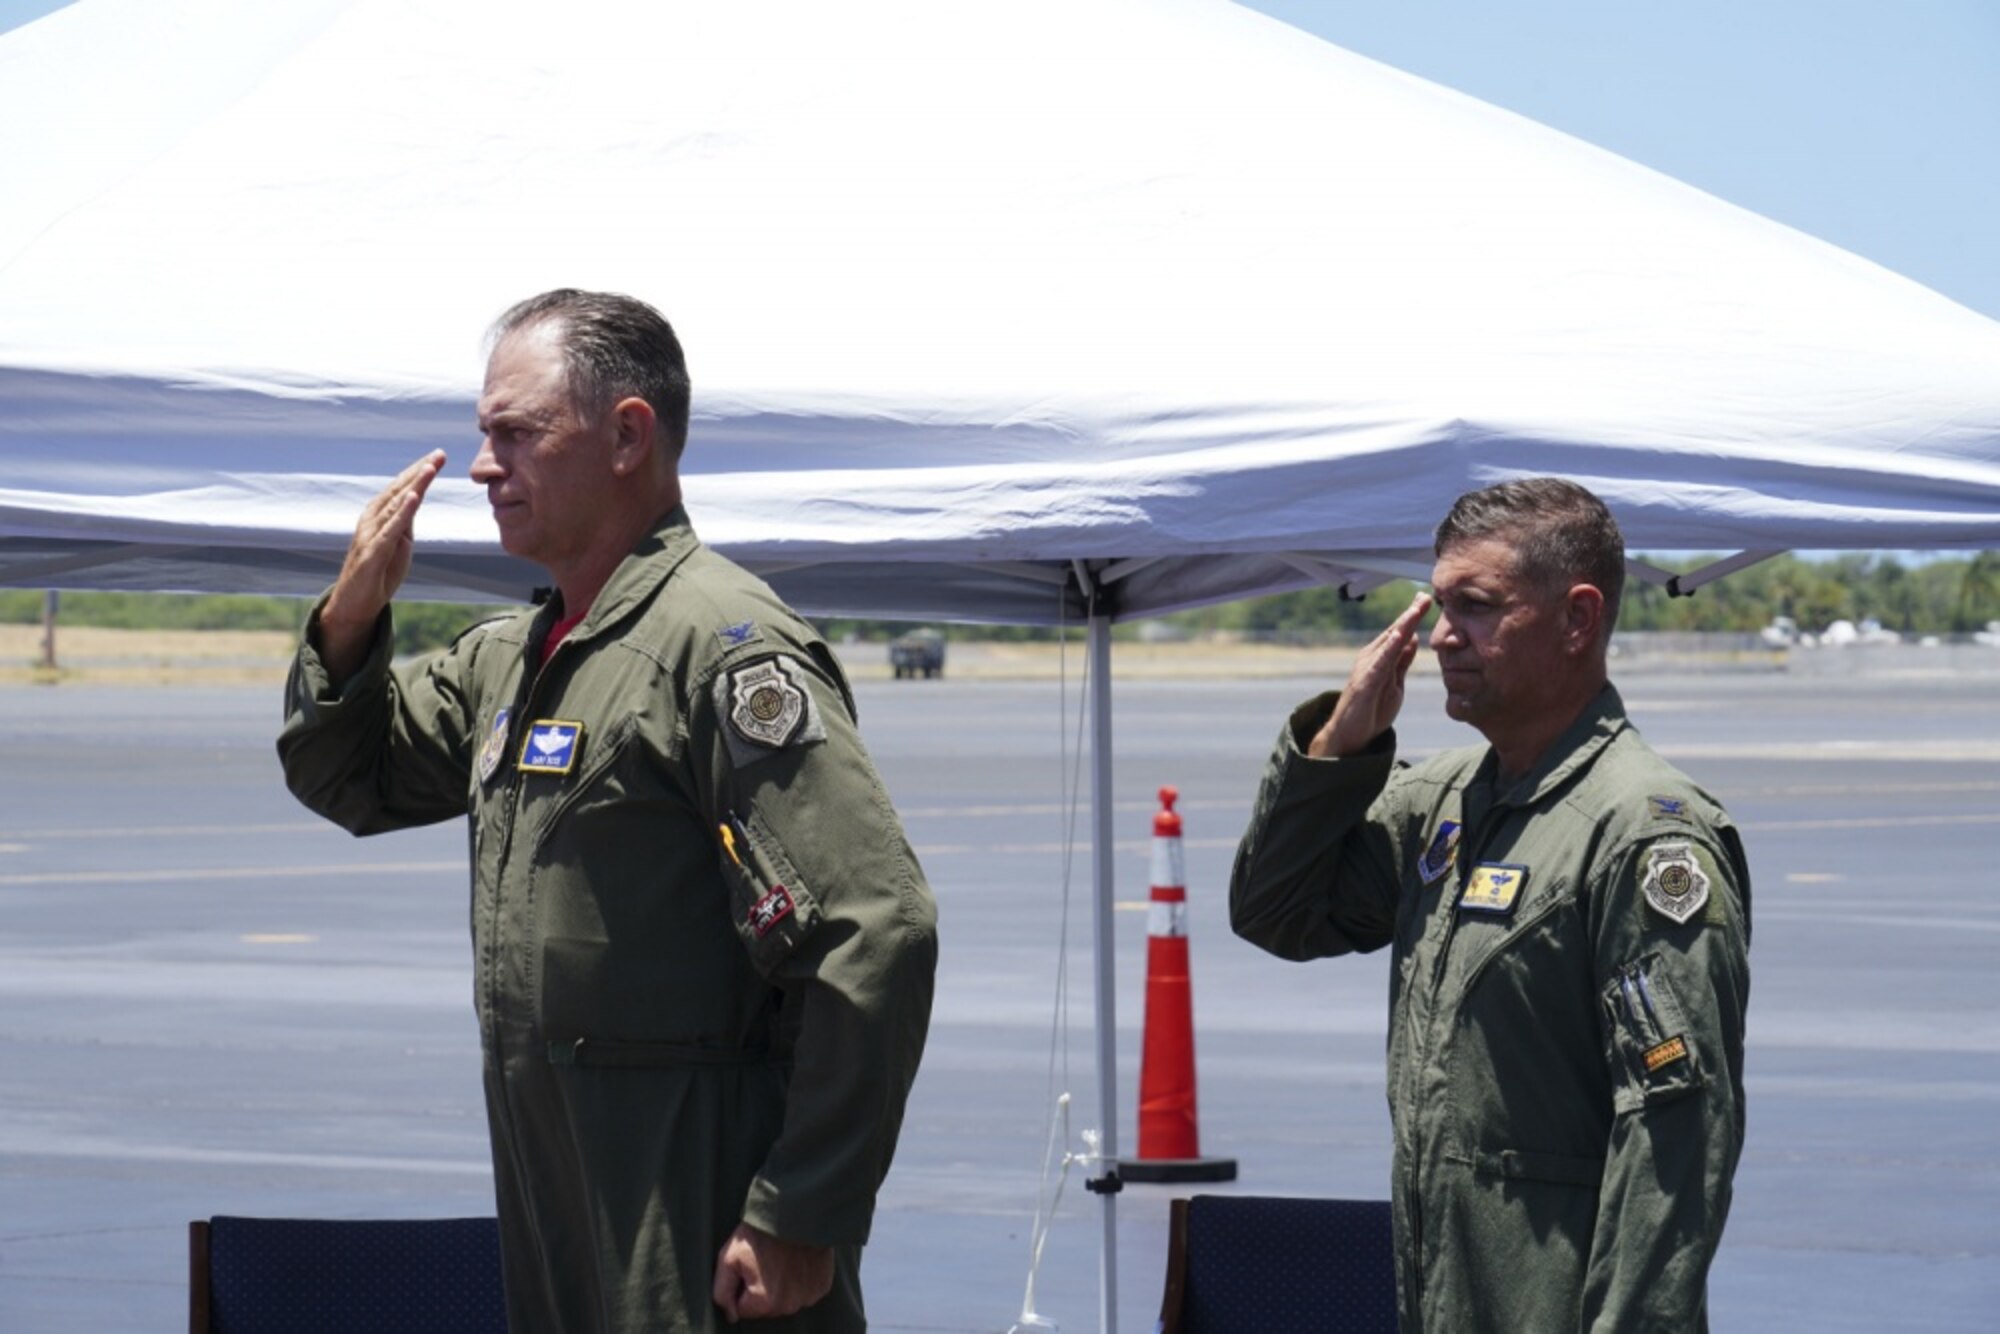 Col. Geoffrey E. Lohmiller, 15th Wing vice commander, renders his final salute during his retirement ceremony at Joint Base Pearl Harbor-Hickam, Hawaii, June 26, 2020. Lohmiller, who served as the vice wing commander since May 2018, will retire later this year. (U.S. Air Force photo by Airman 1st Class Erin Baxter)